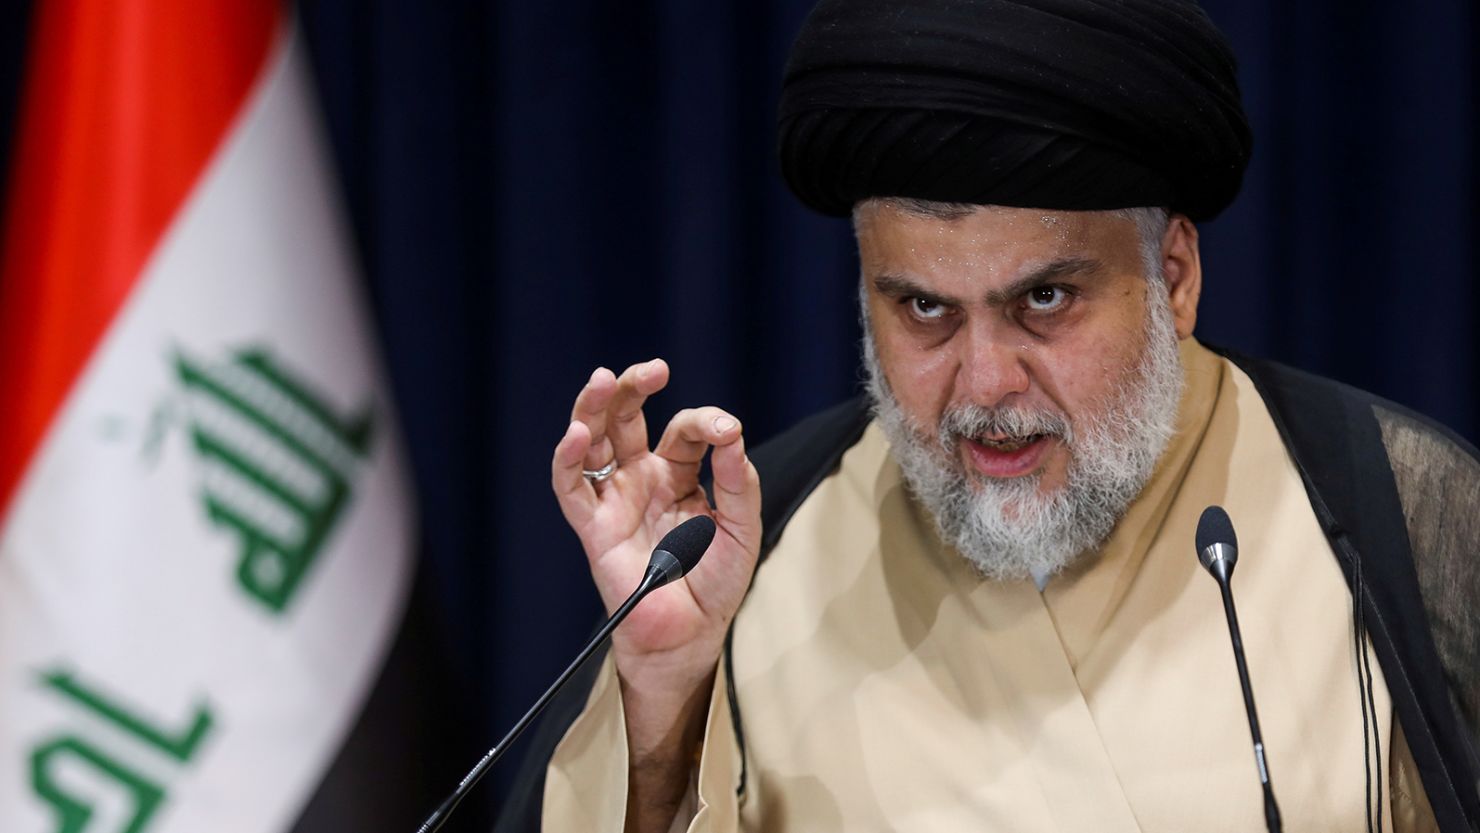 Iraqi Shiite cleric Moqtada al-Sadr speaks after preliminary results of Iraq's parliamentary election were announced in Najaf, Iraq on October 11, 2021. 